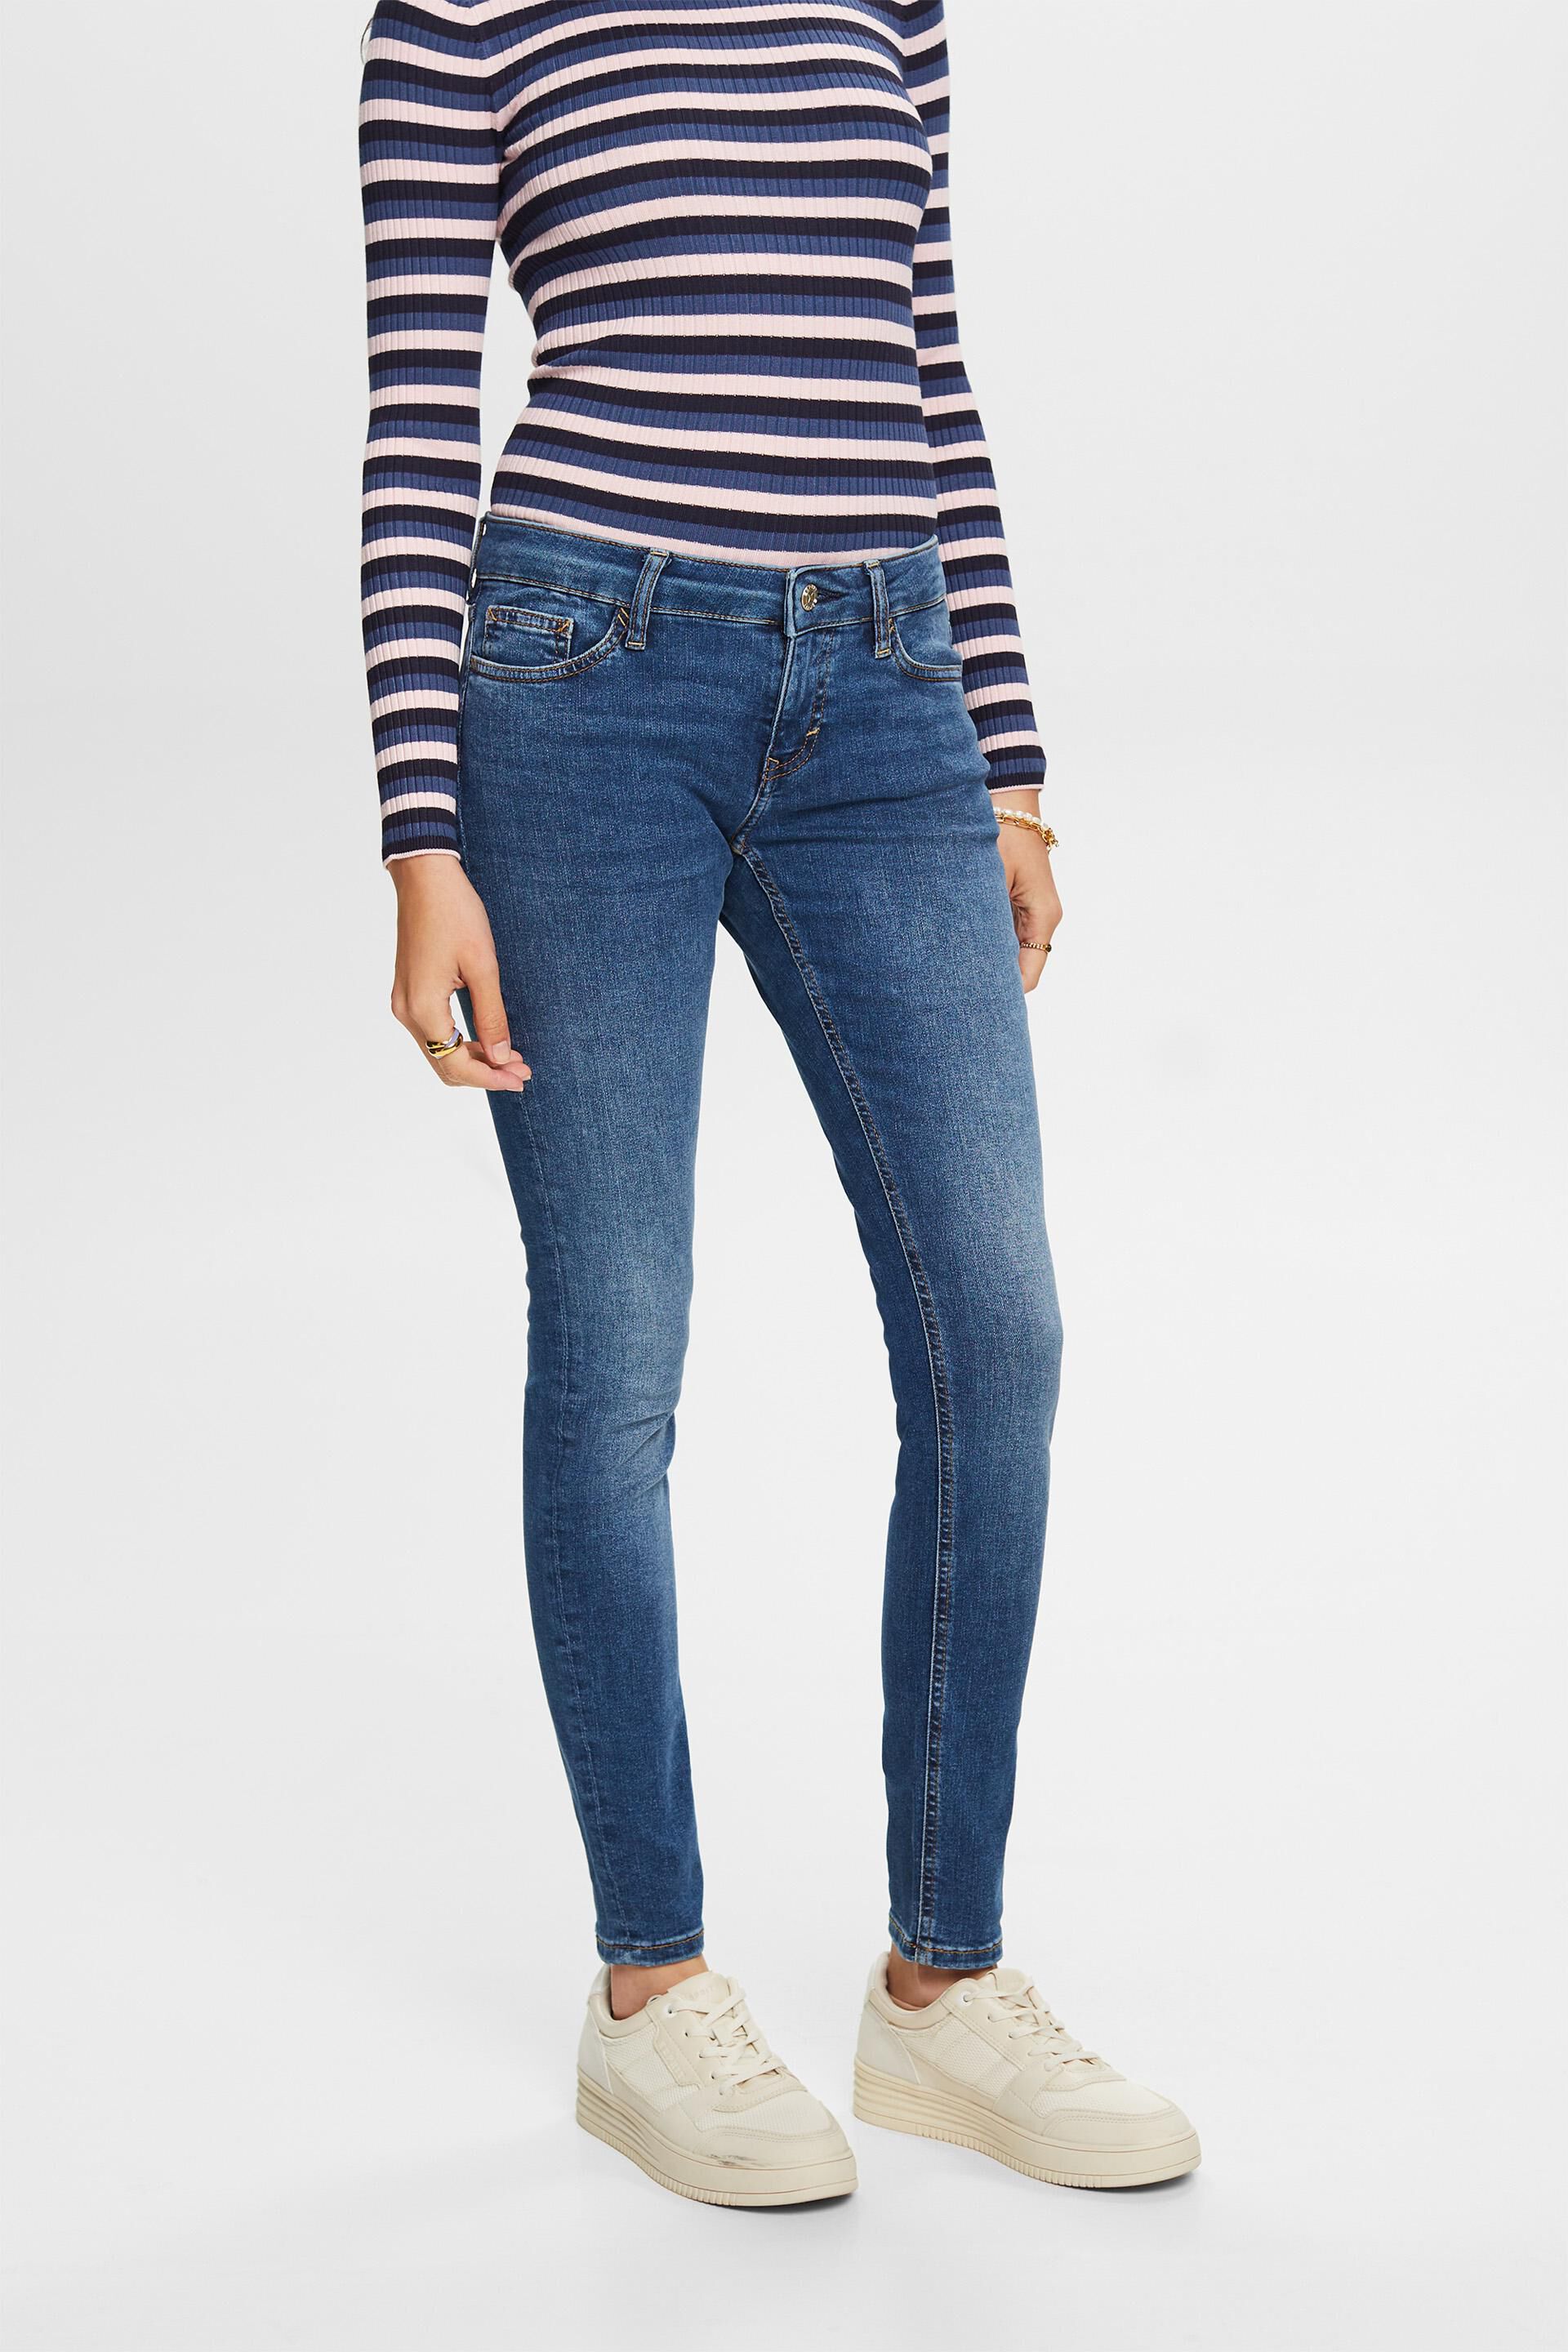 Esprit Damen Recycled: low-rise skinny jeans